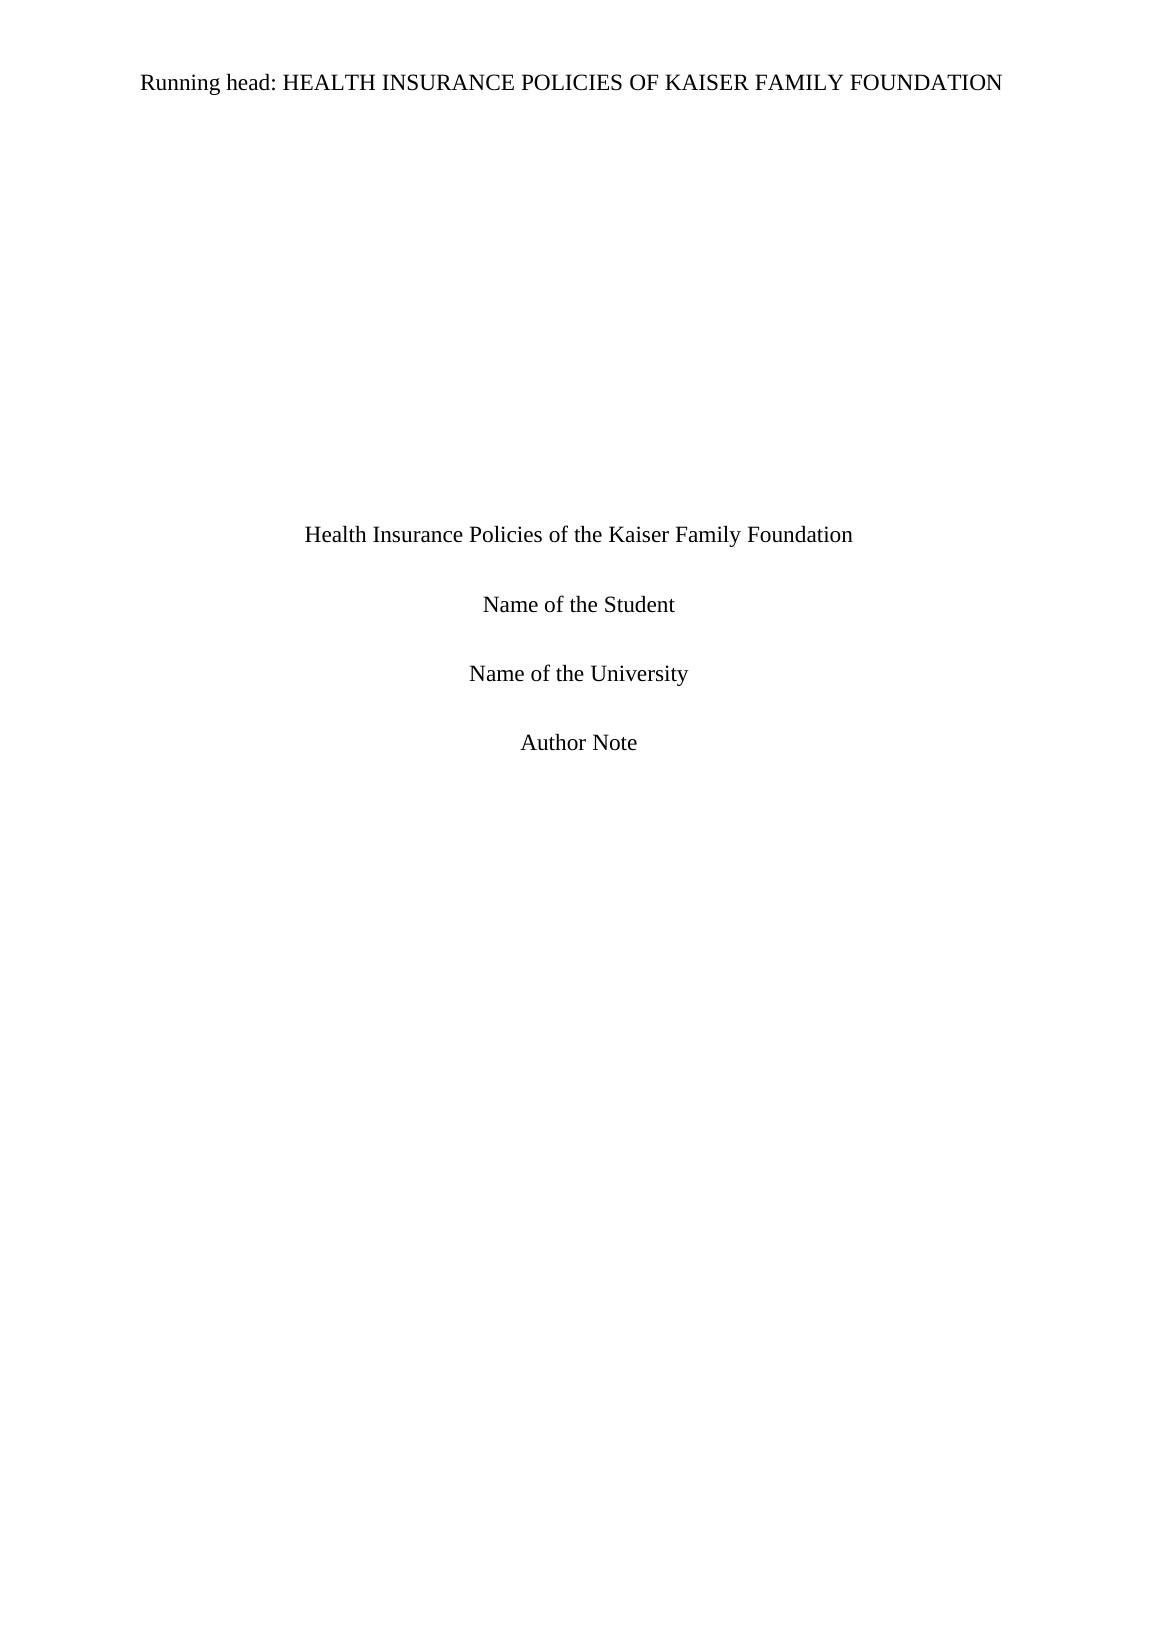 HEALTH INSURANCE POLICIES OF THE KAISER FAMILY FOUNDATION_1